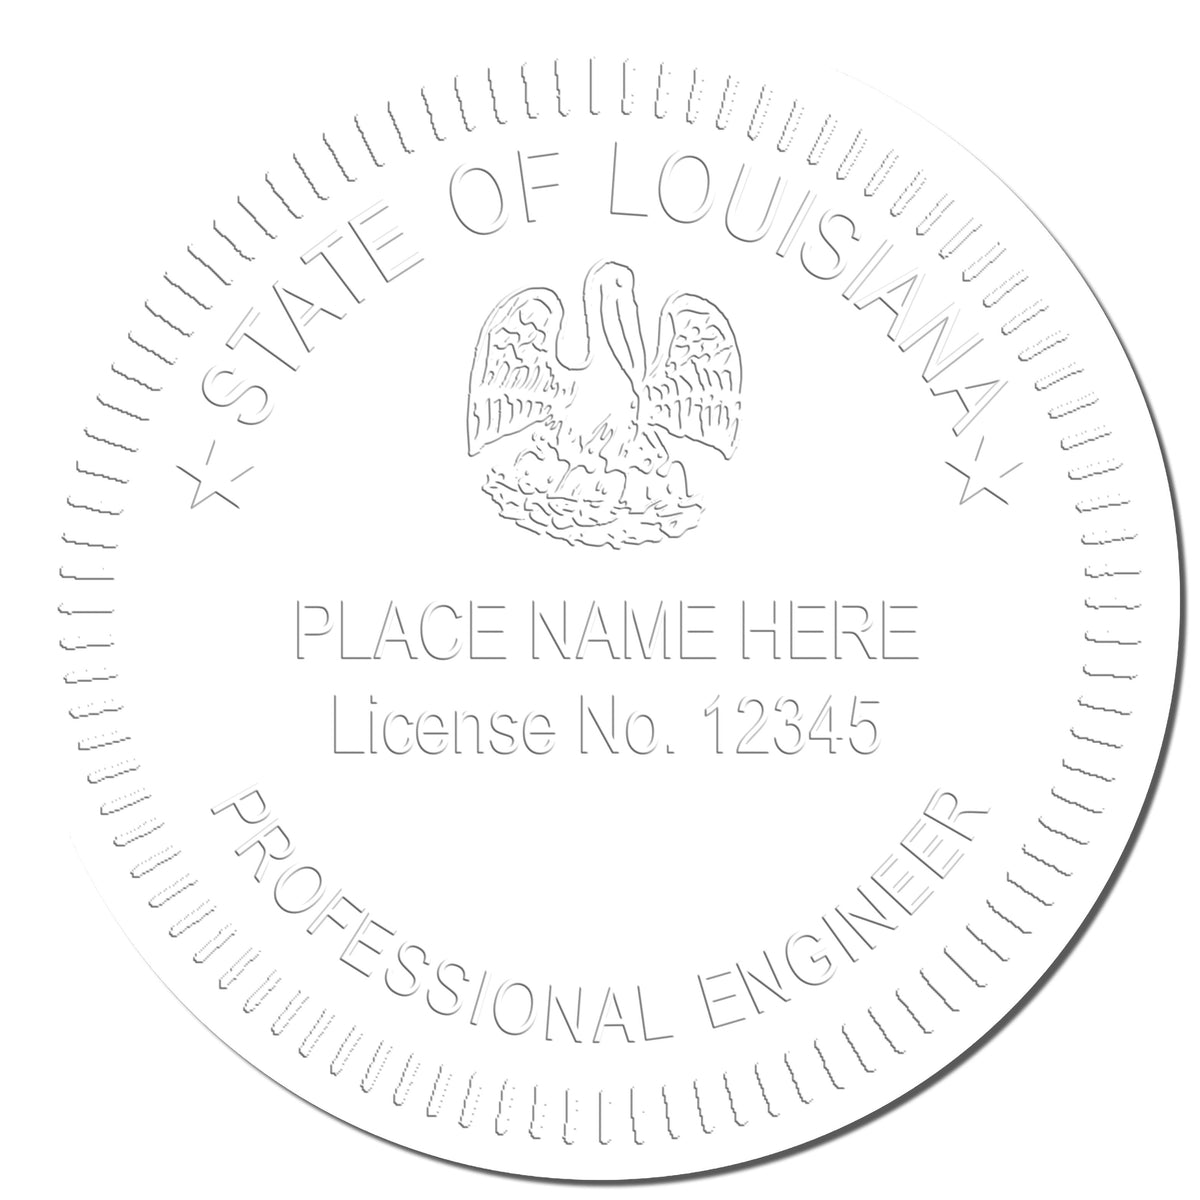 This paper is stamped with a sample imprint of the Gift Louisiana Engineer Seal, signifying its quality and reliability.